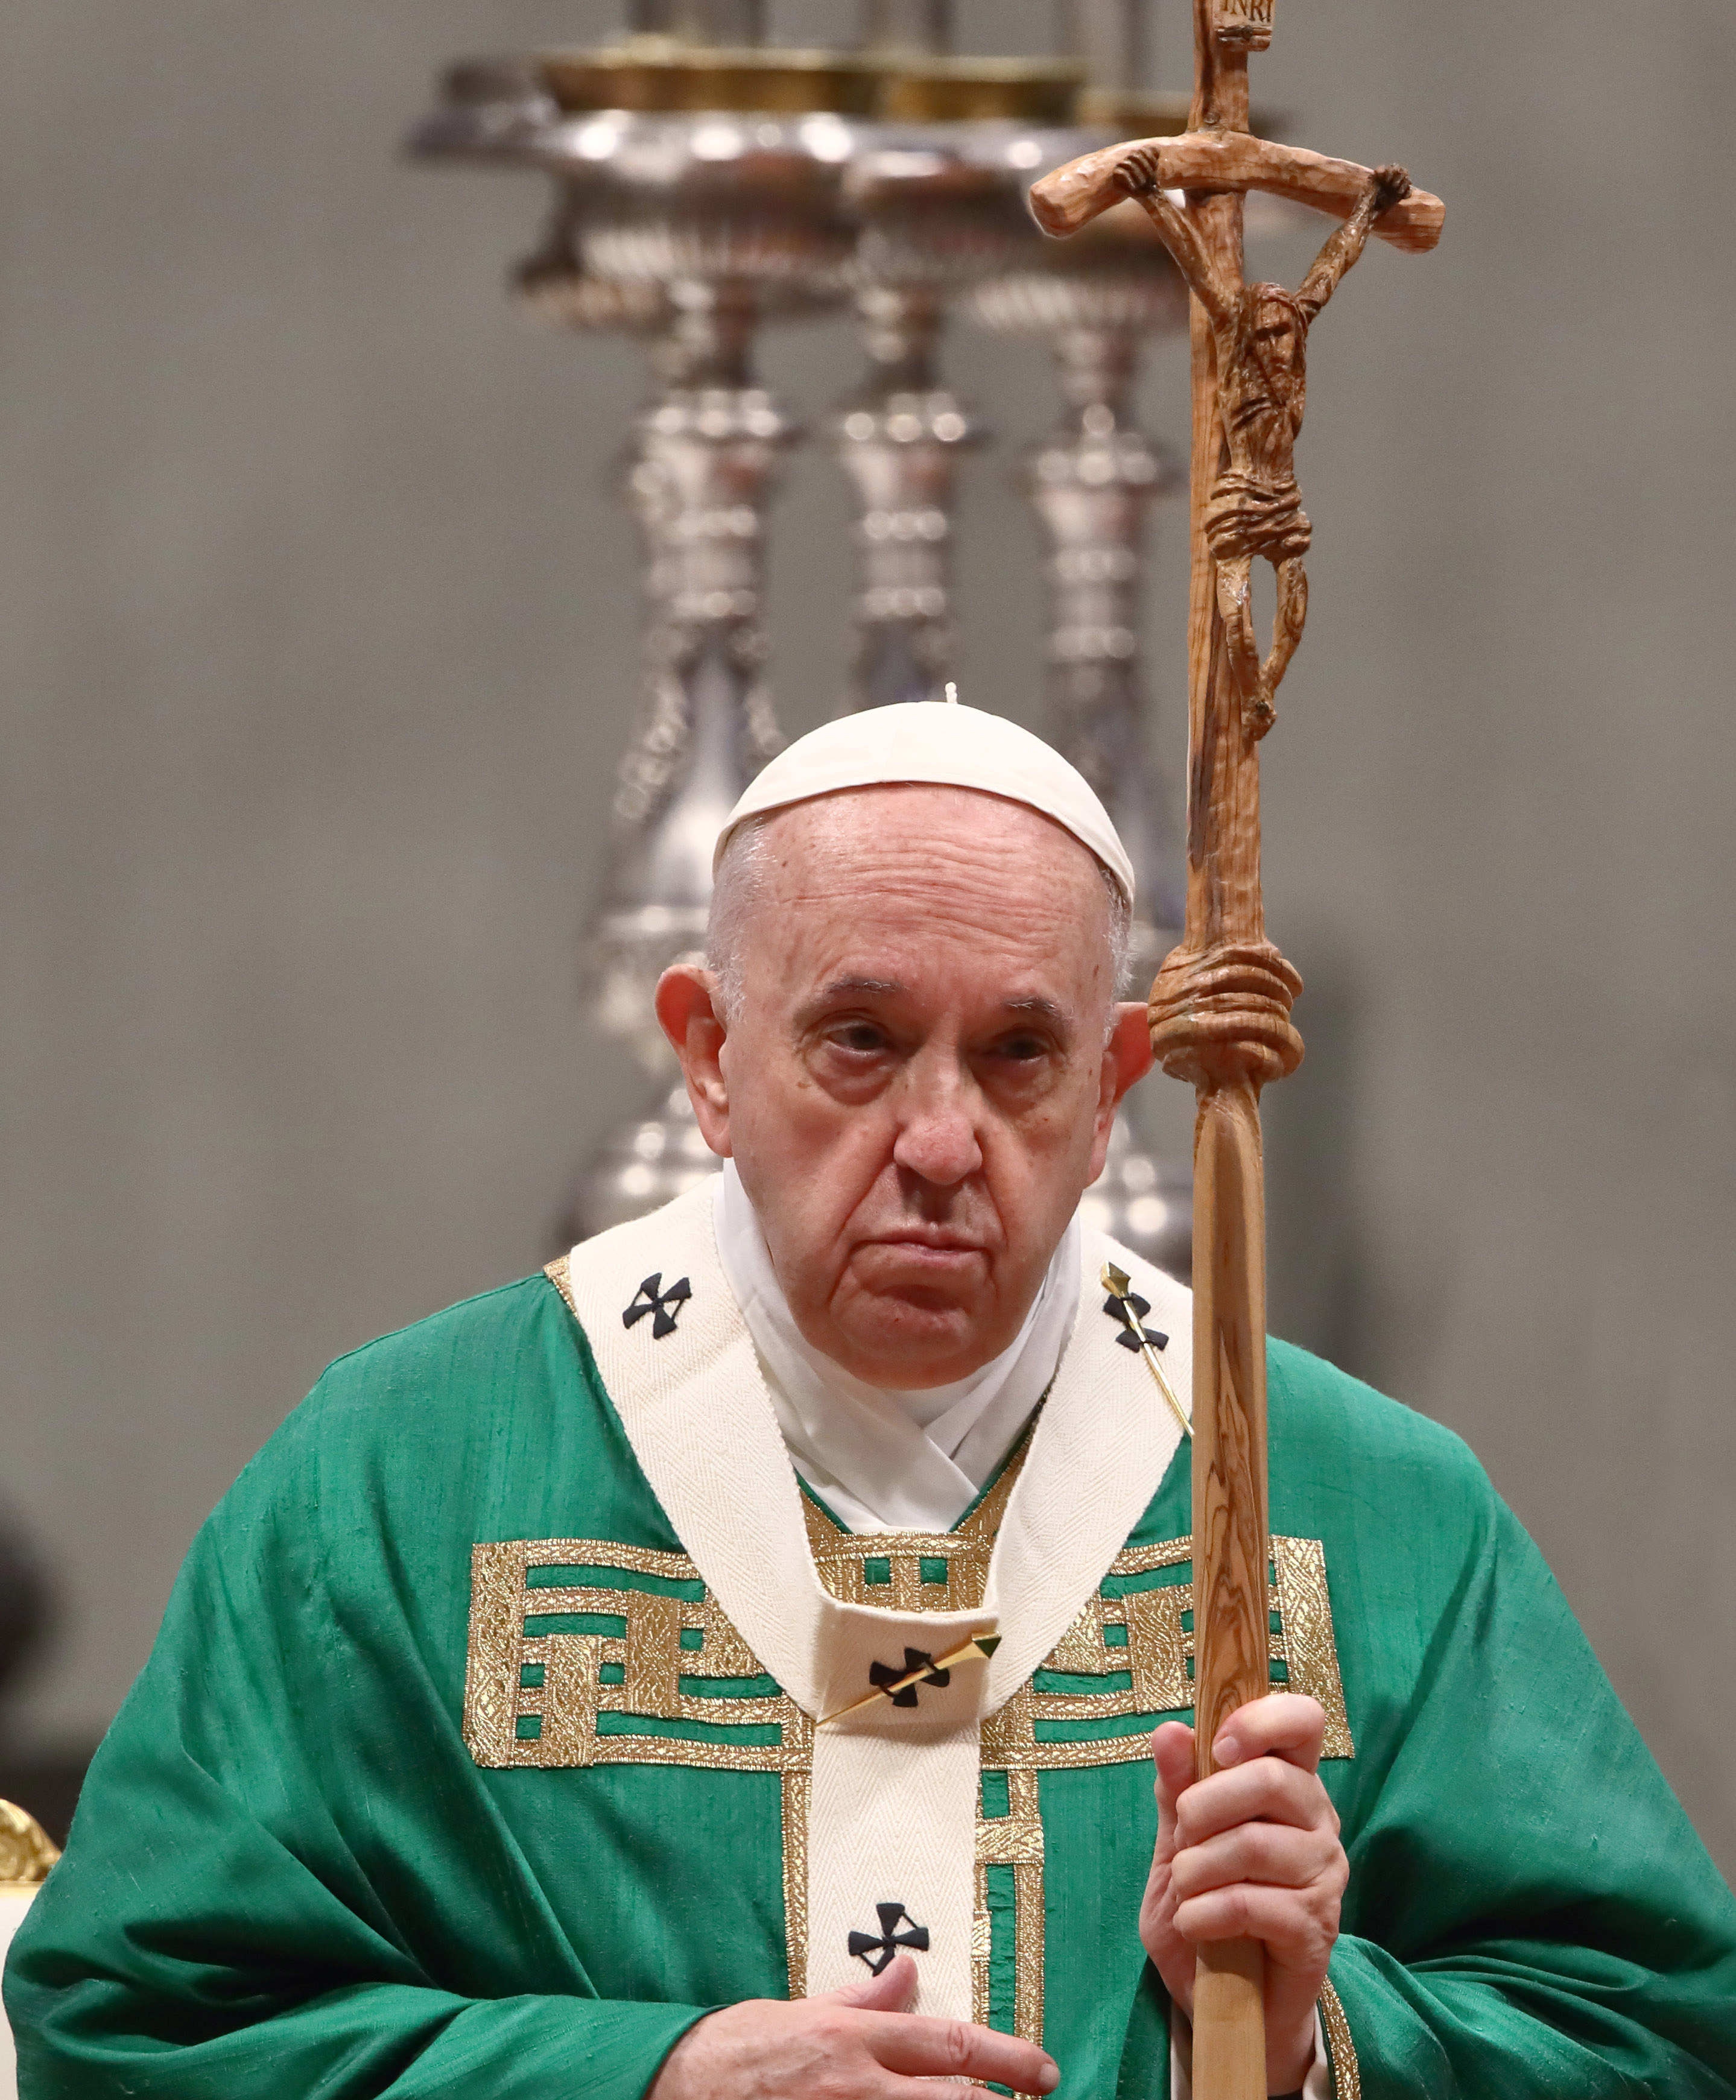 The pope celebrating World Day of the Poor